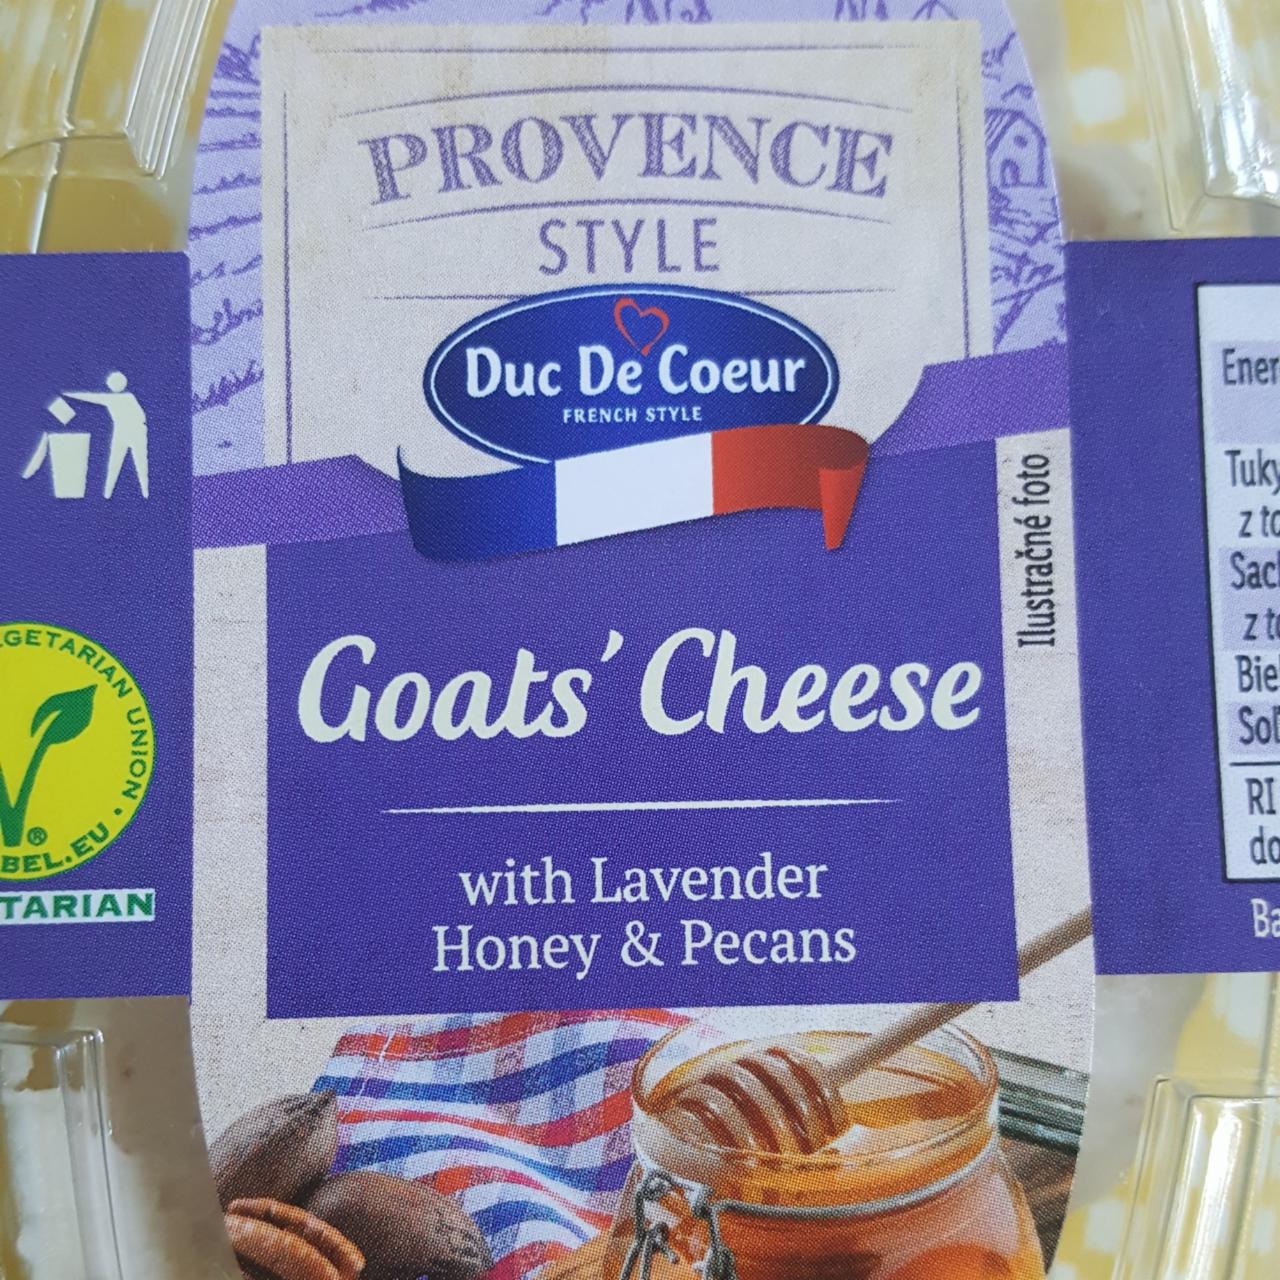 Fotografie - Goats' Cheese with Lavender Honey & Pecans Provence style